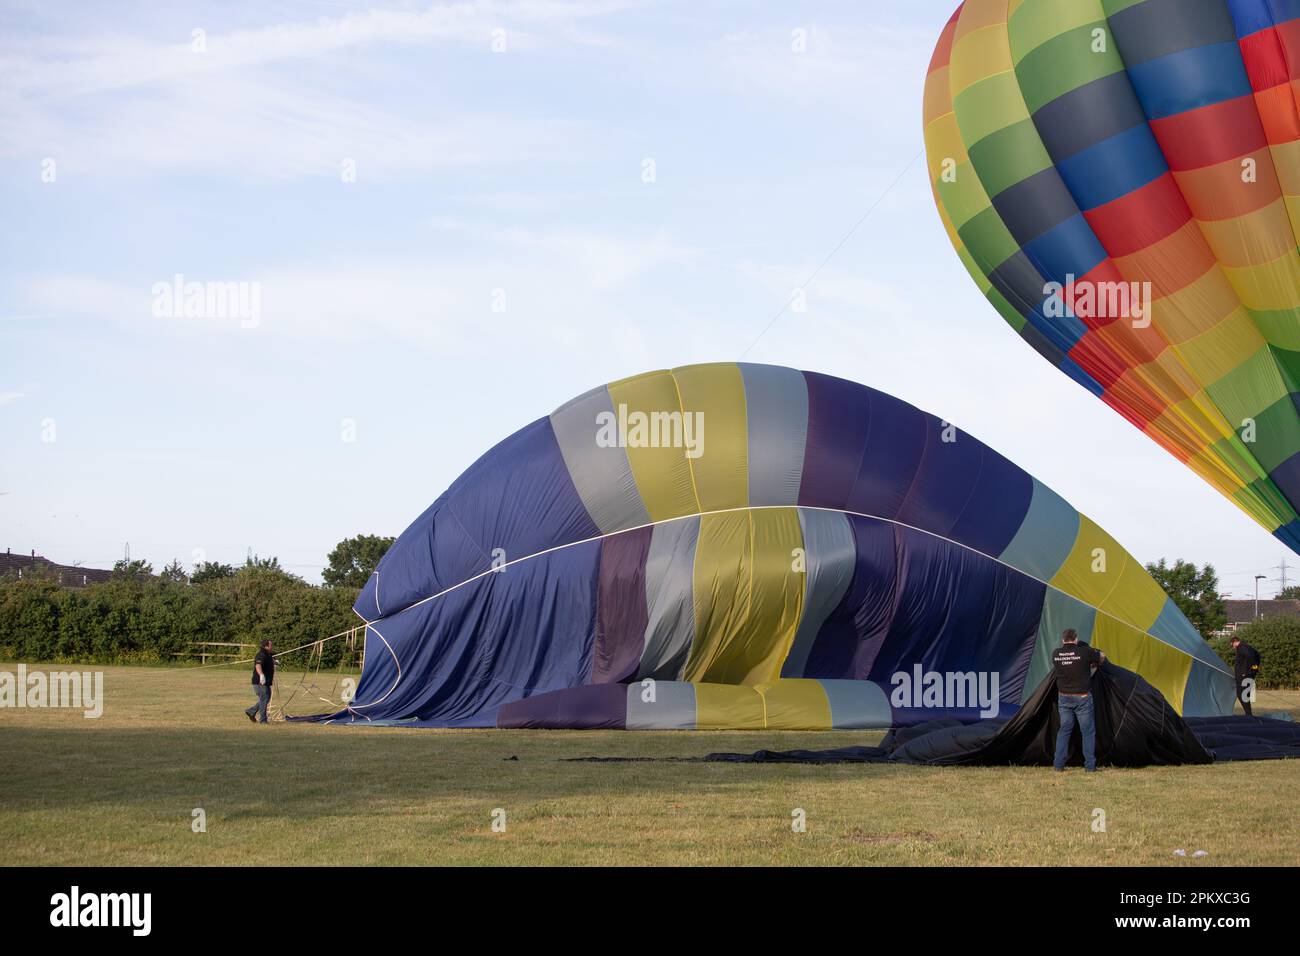 People work to deflate, roll up and pack hot air balloons which have just landed Stock Photo